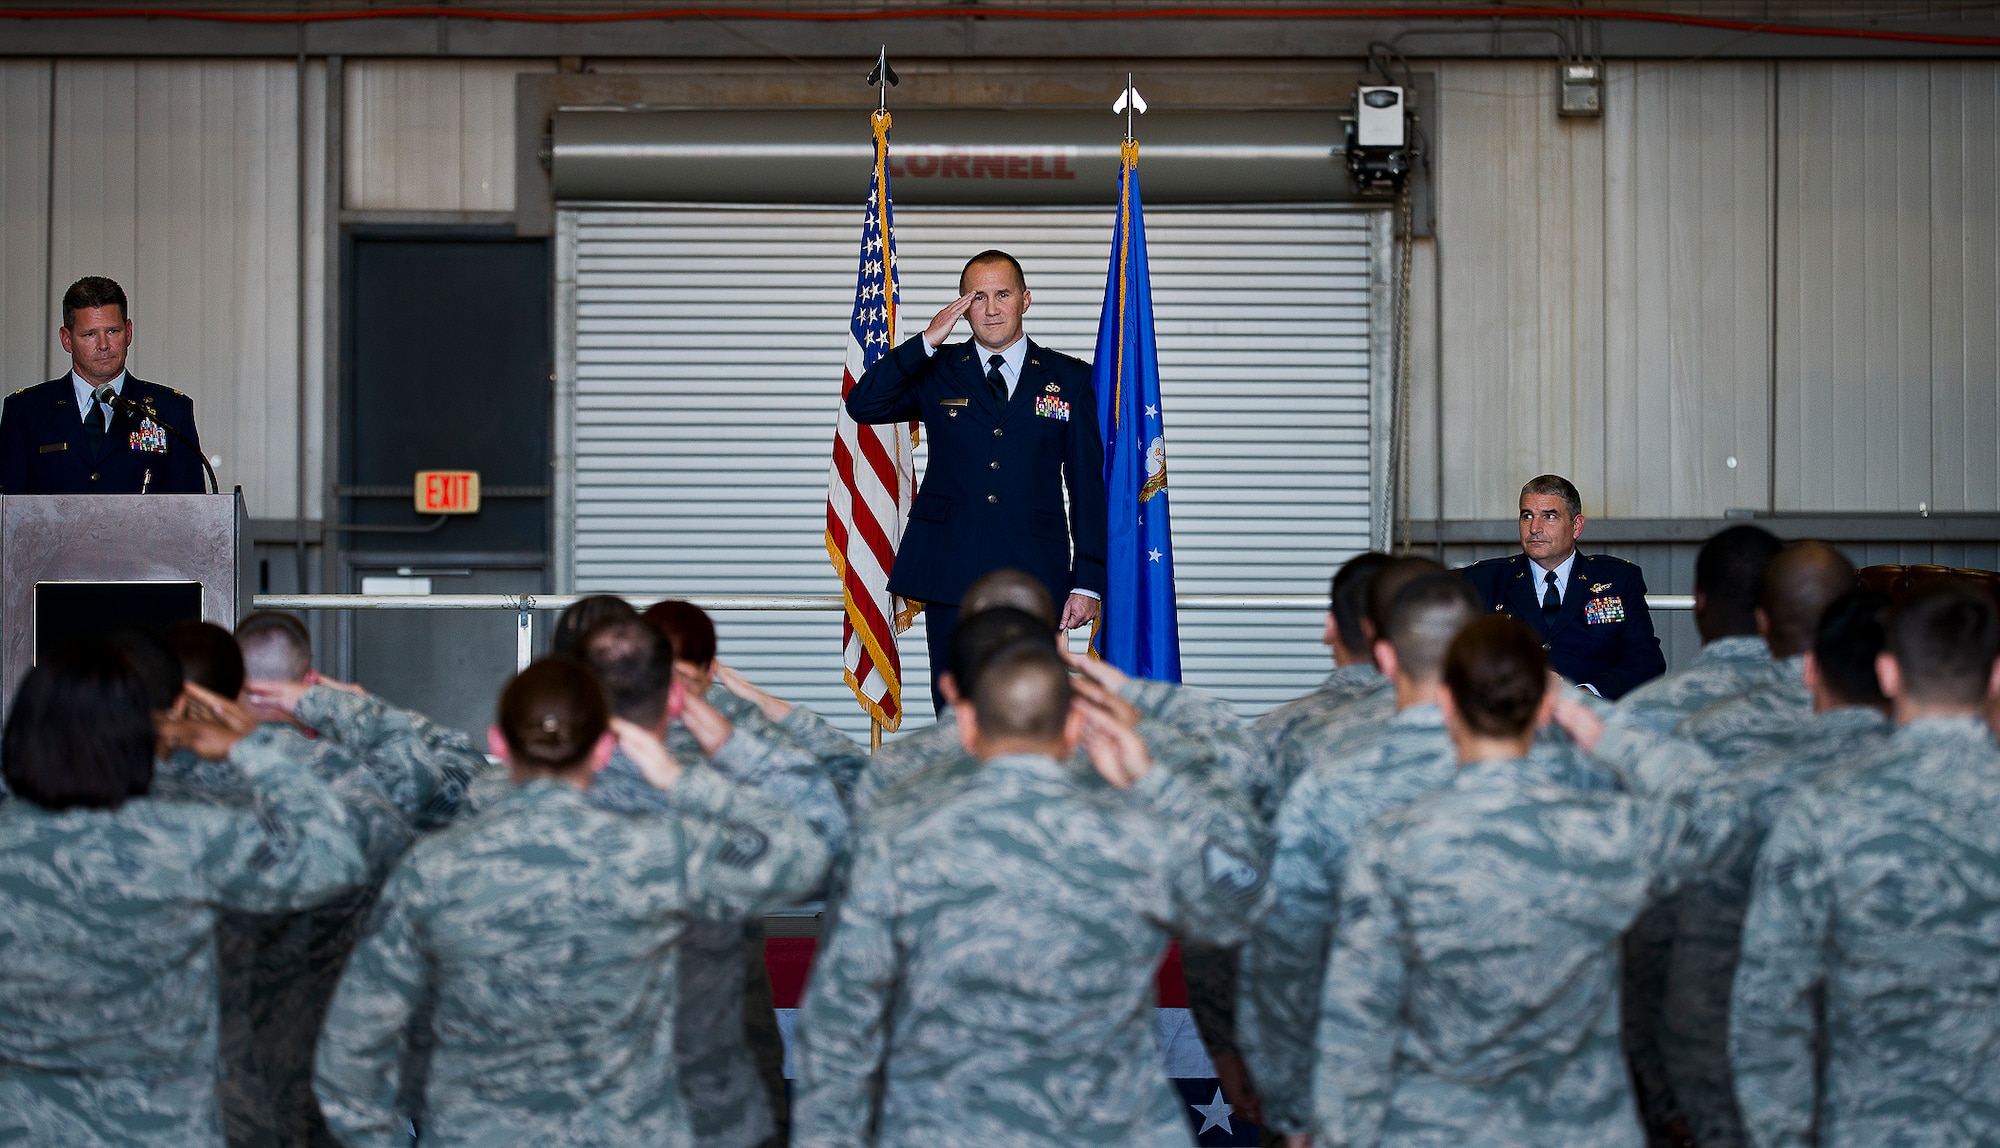 Lt. Col. Brian Stahl salutes members of the 919th Special Operations Mission Support Group as their new commander during his assumption of command ceremony at Duke Field, Fla., March 1.  (U.S. Air Force photo/Tech. Sgt. Samuel King Jr.)